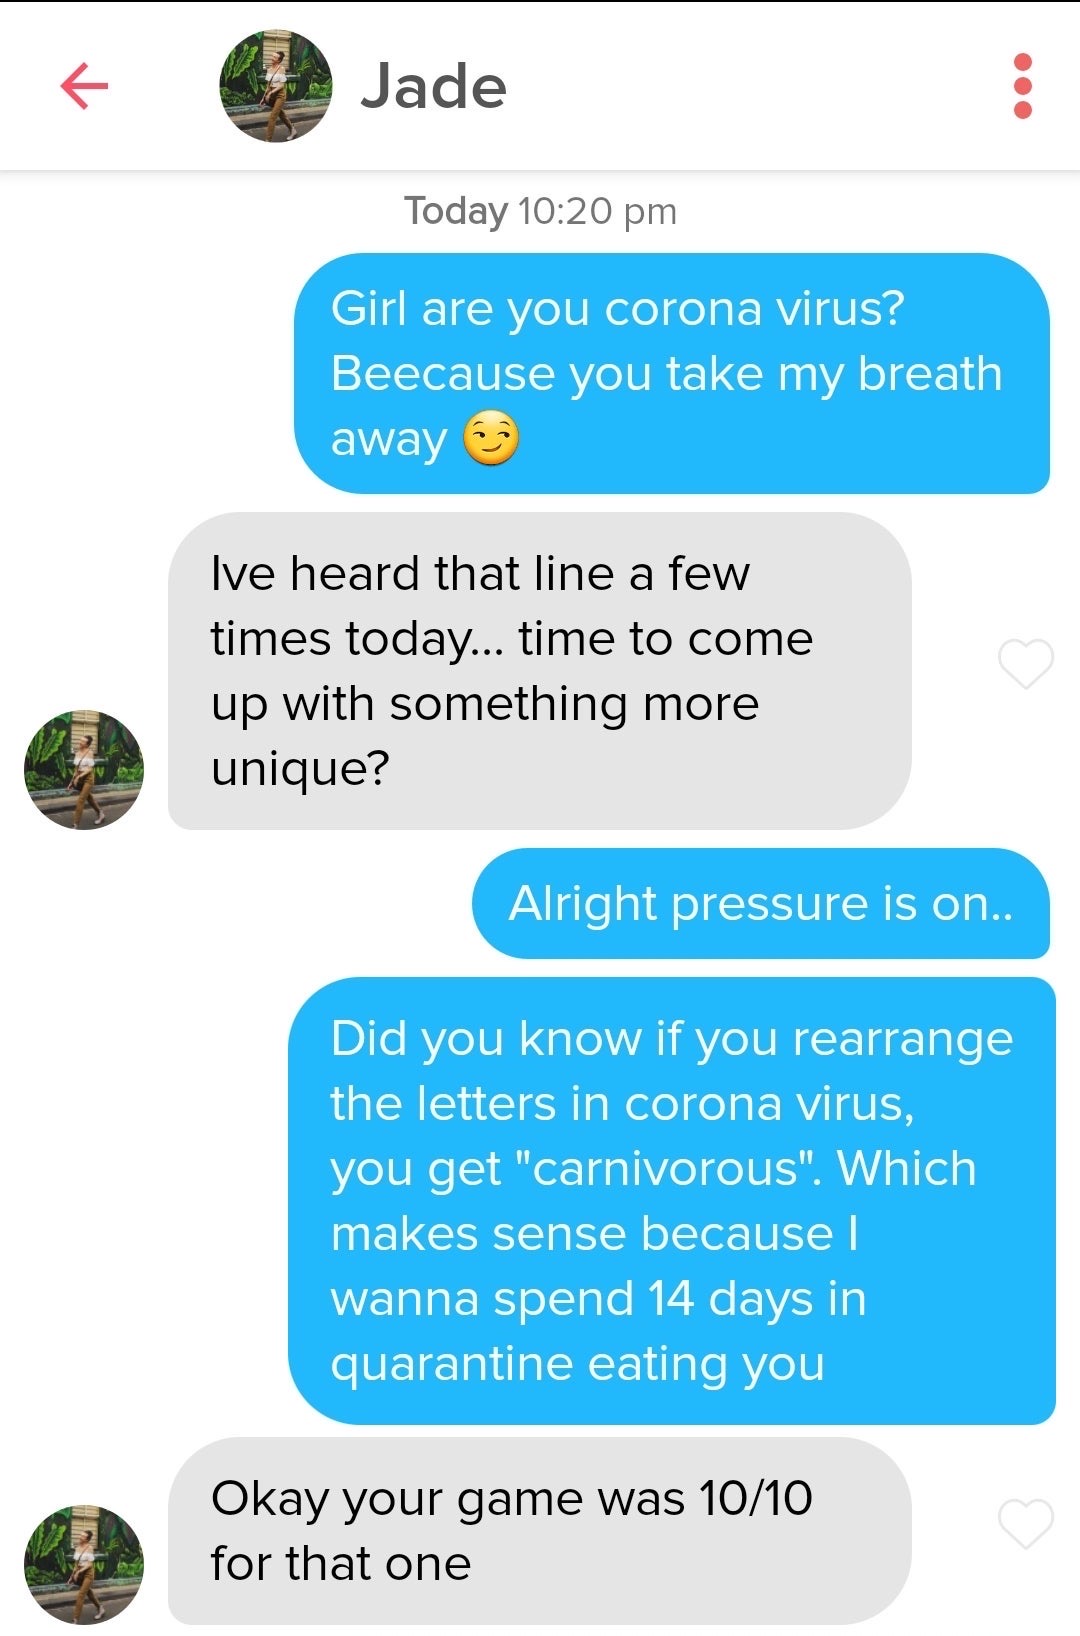 Tinder pick up lines to get laid